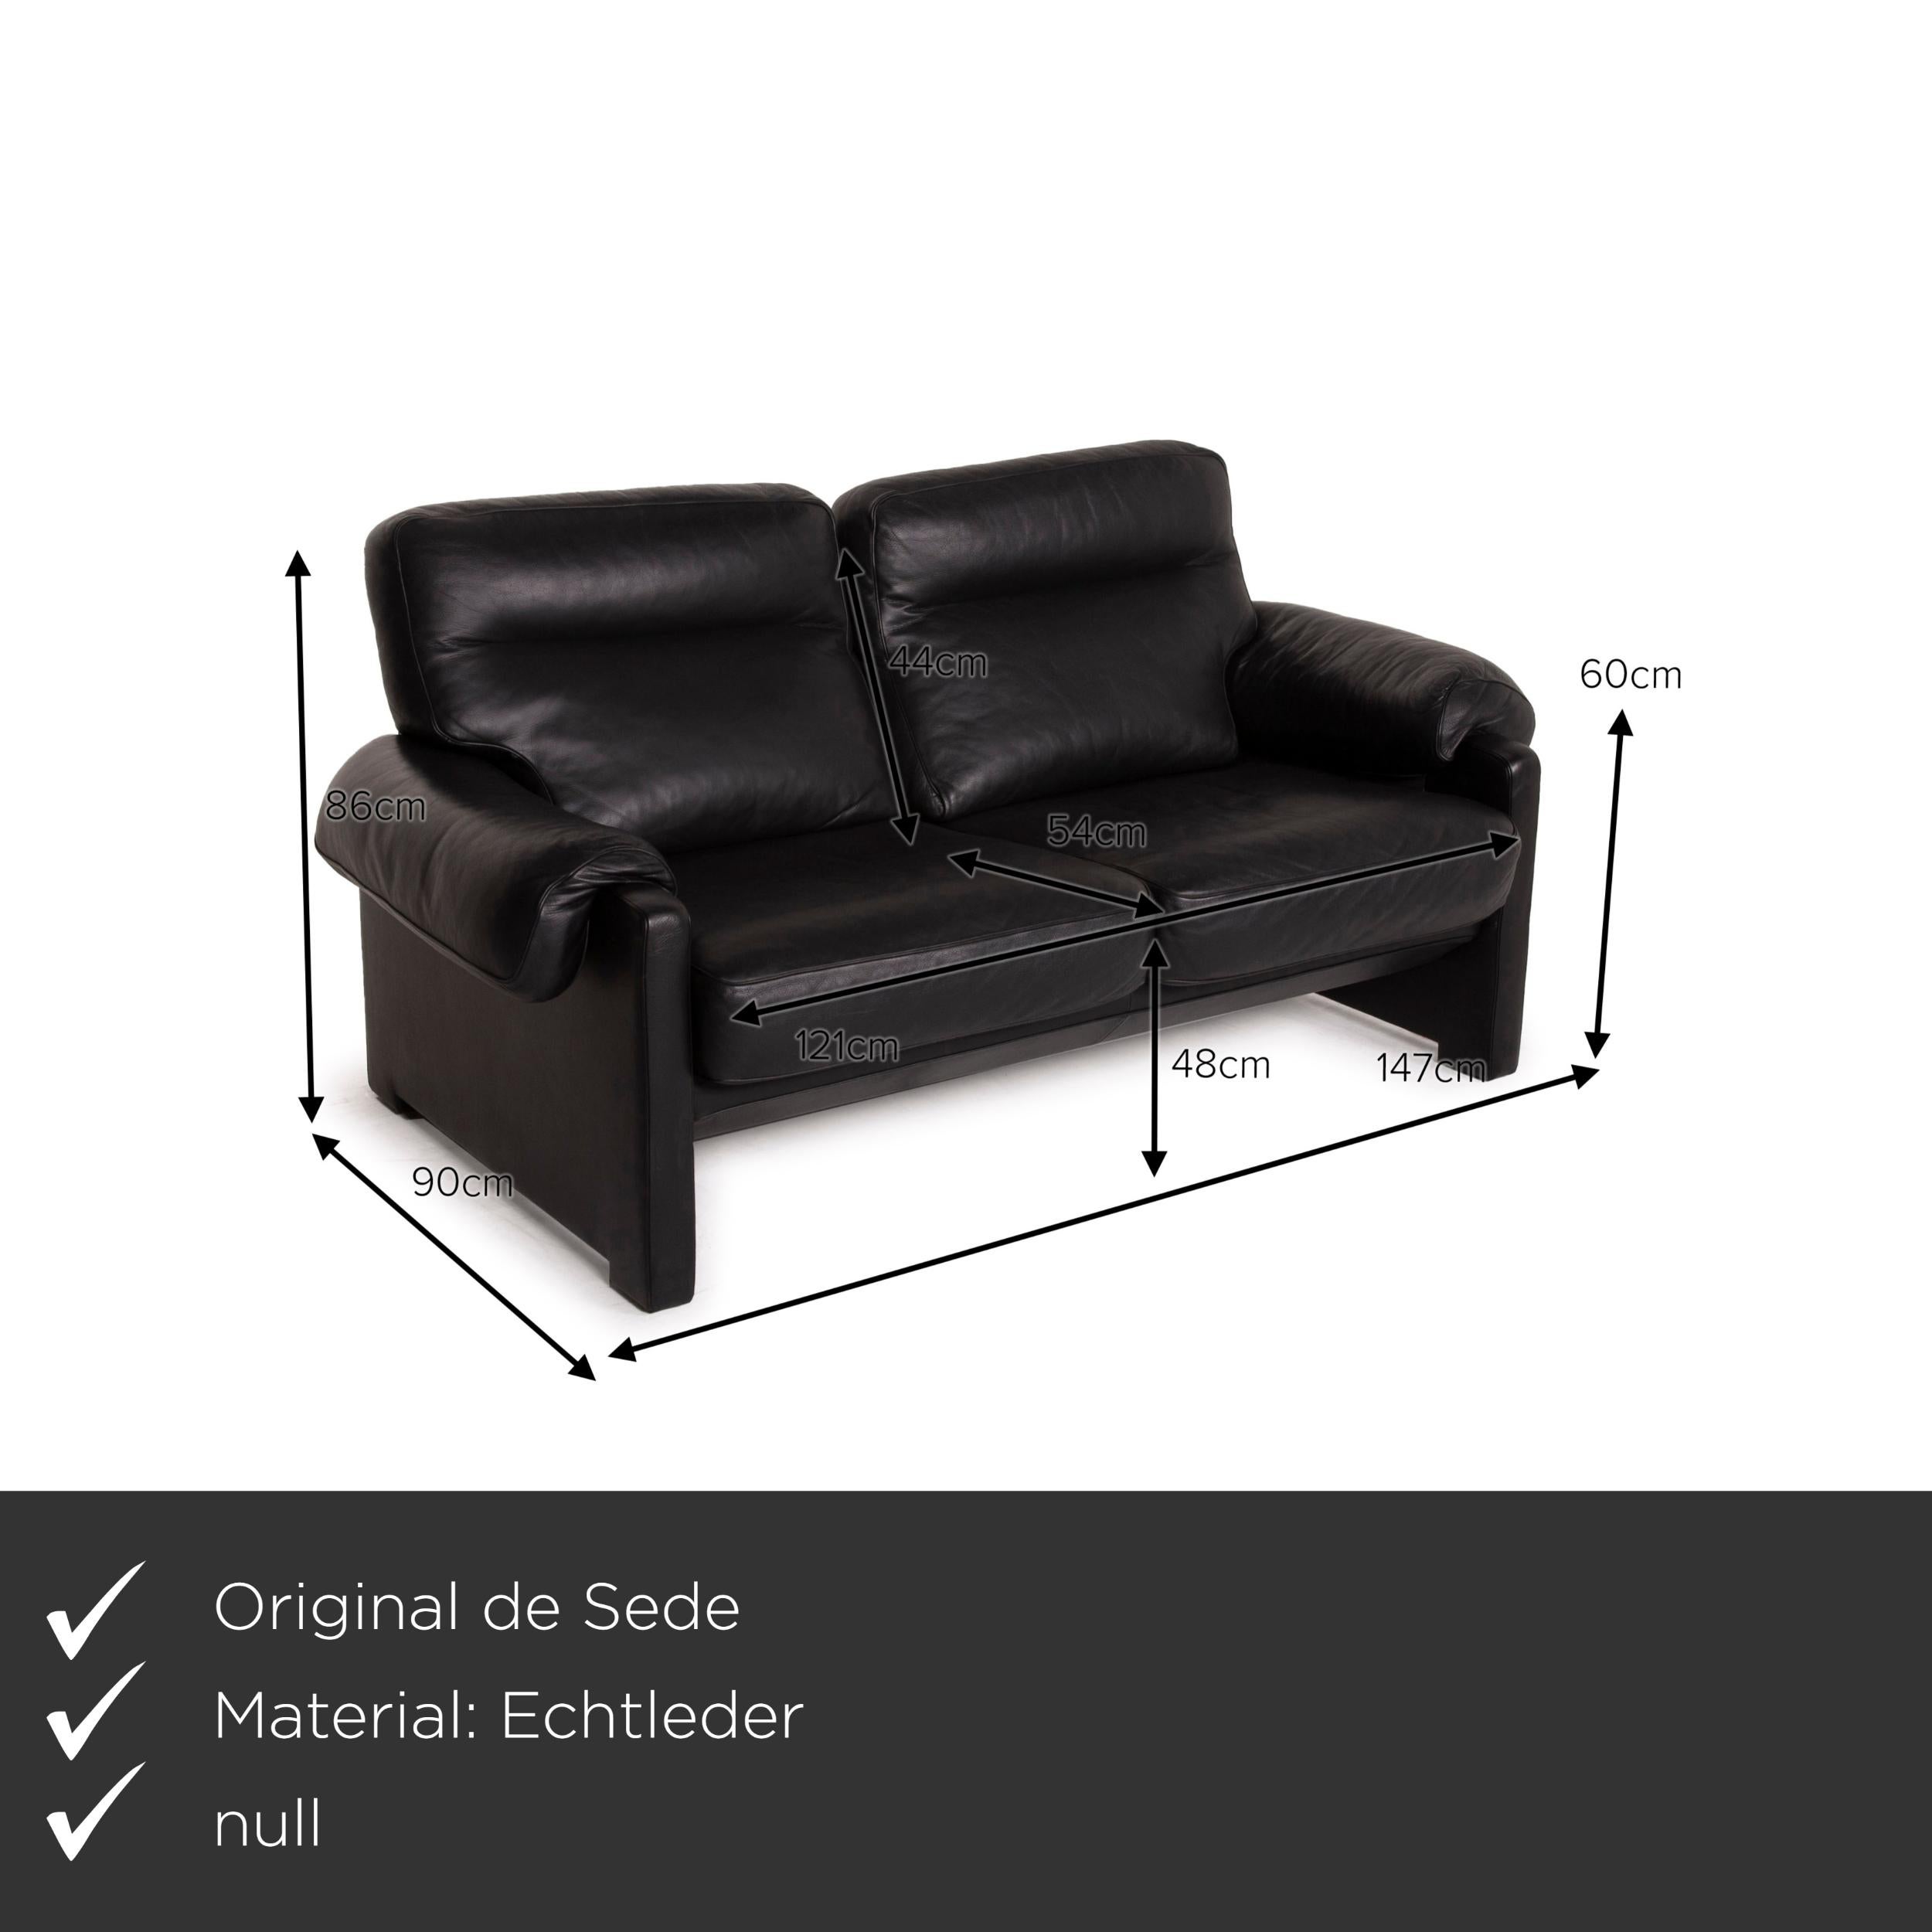 Modern De Sede Ds 70 Leather Sofa Set Black 1x Three-Seater 1x Two-Seater Set For Sale